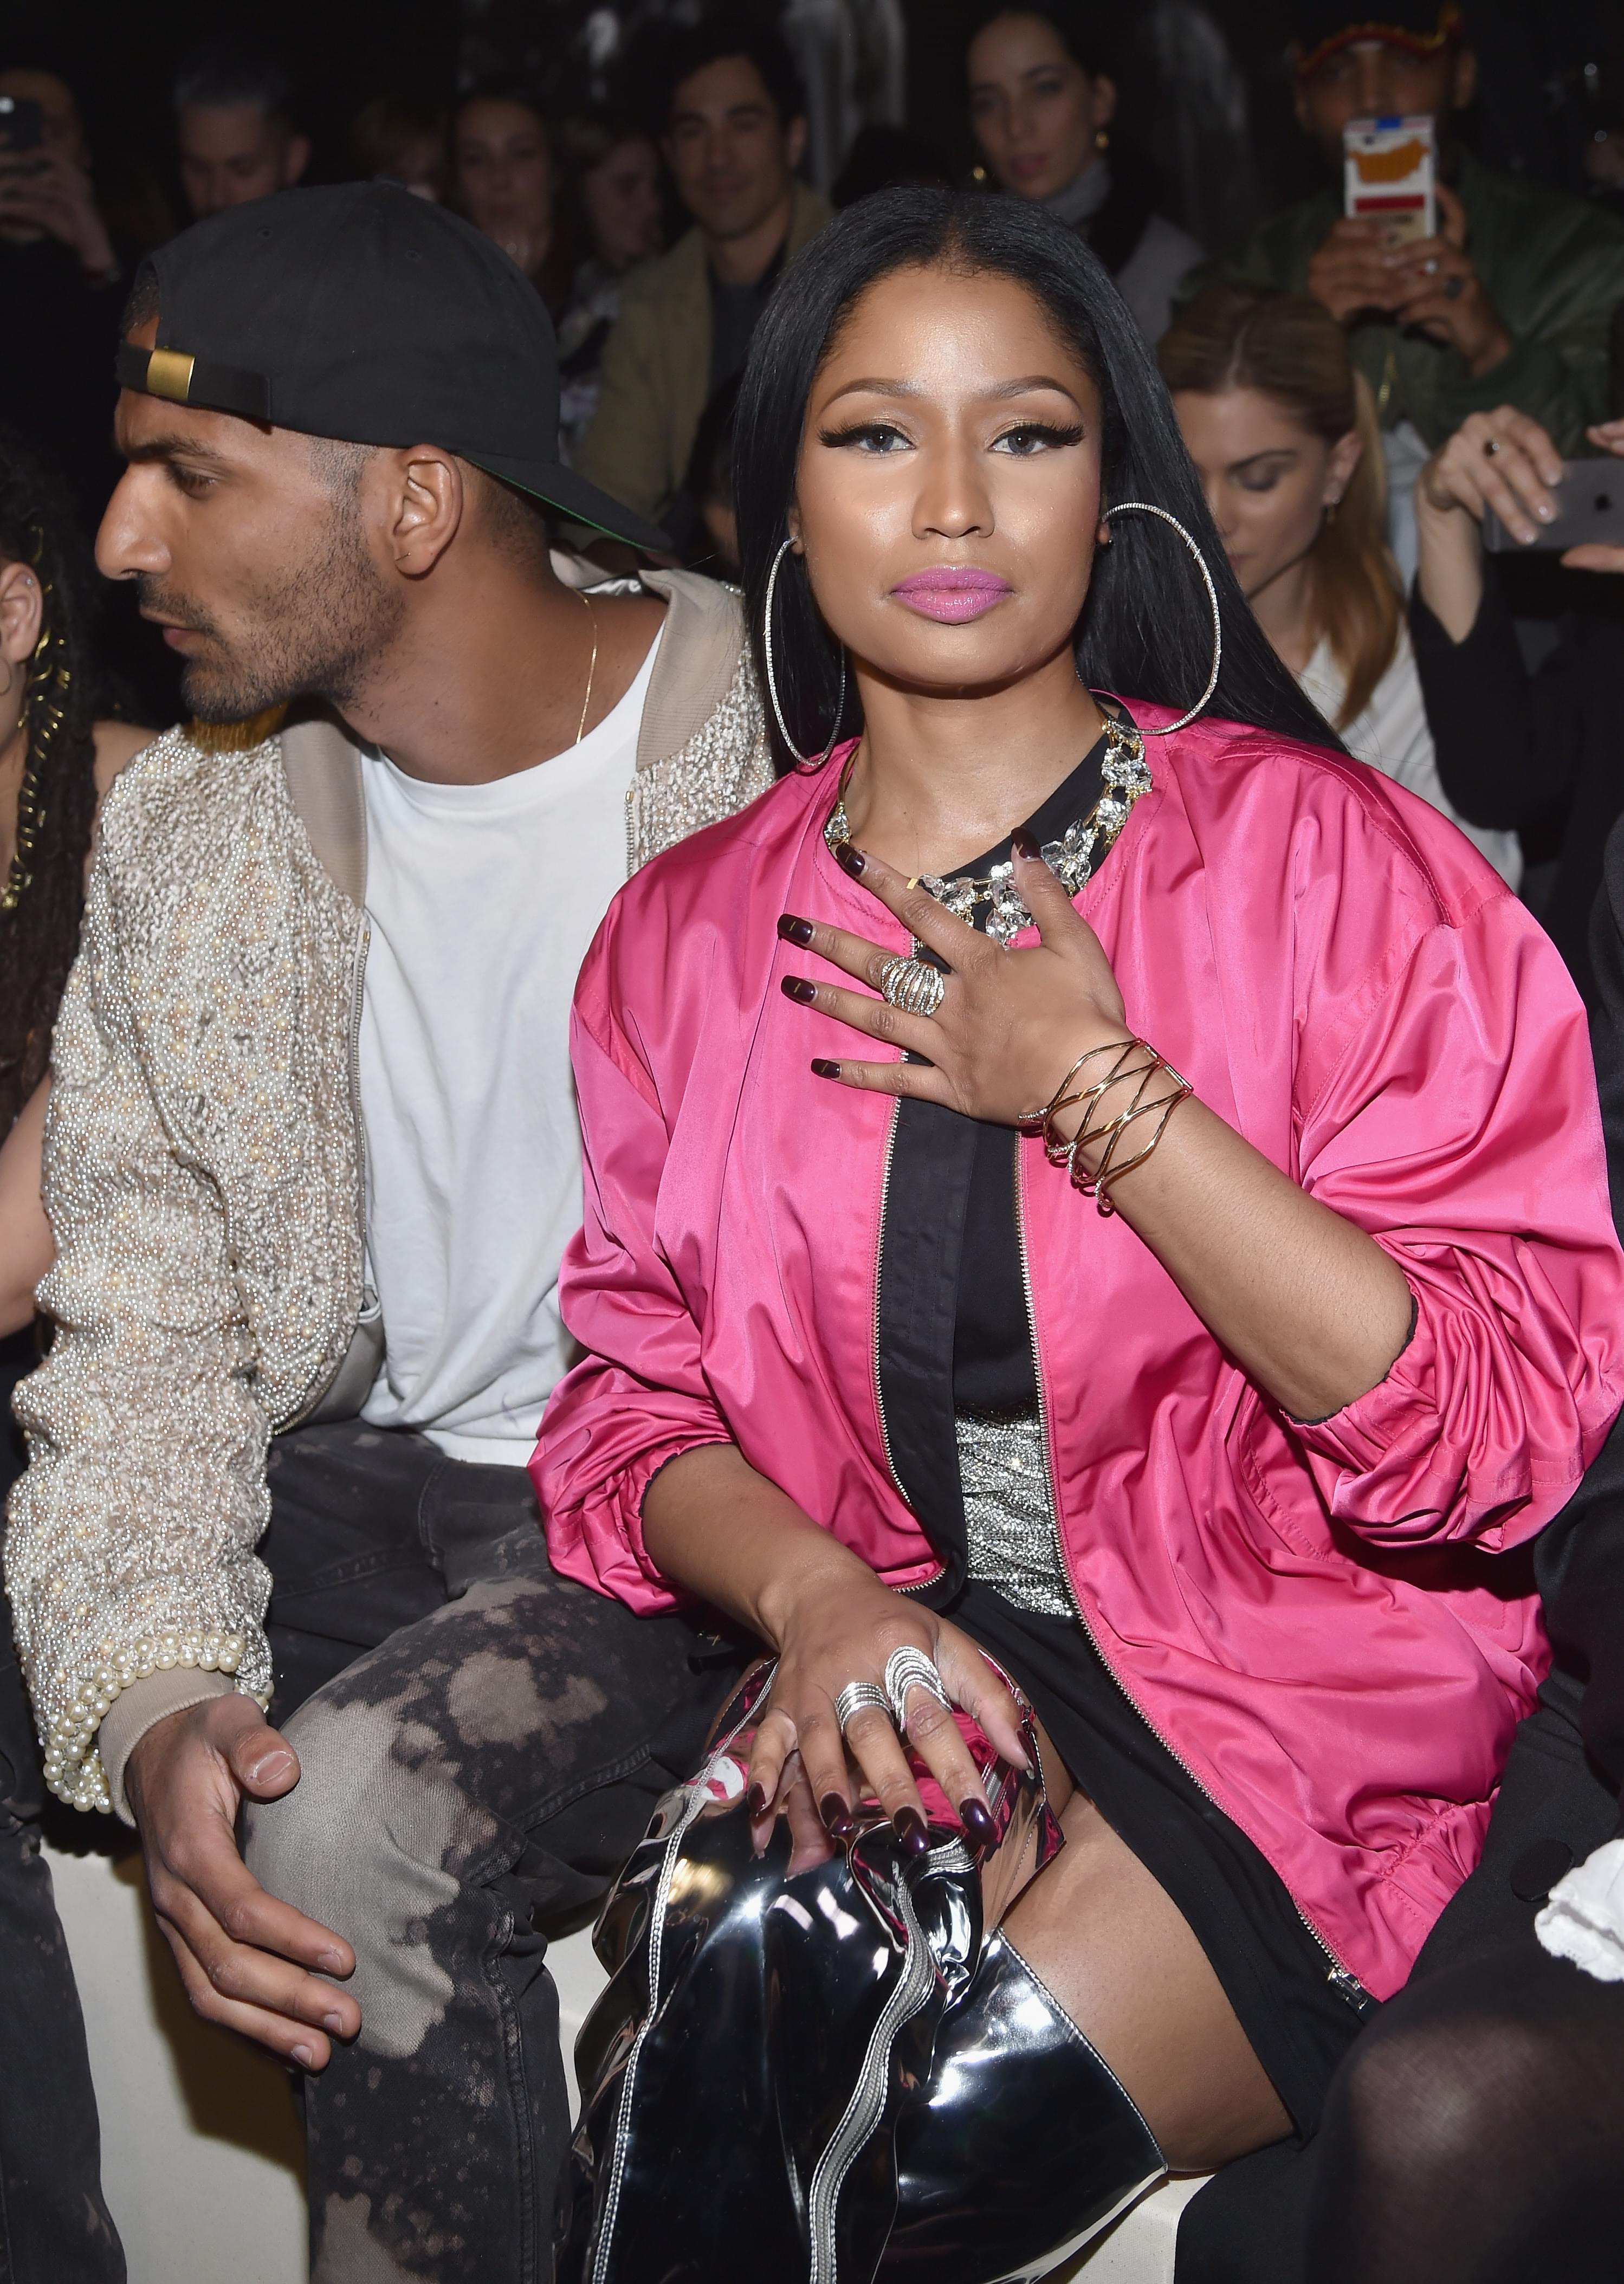 Nicki Minaj Has Just Signed A Big Modeling Contract [LOOK]